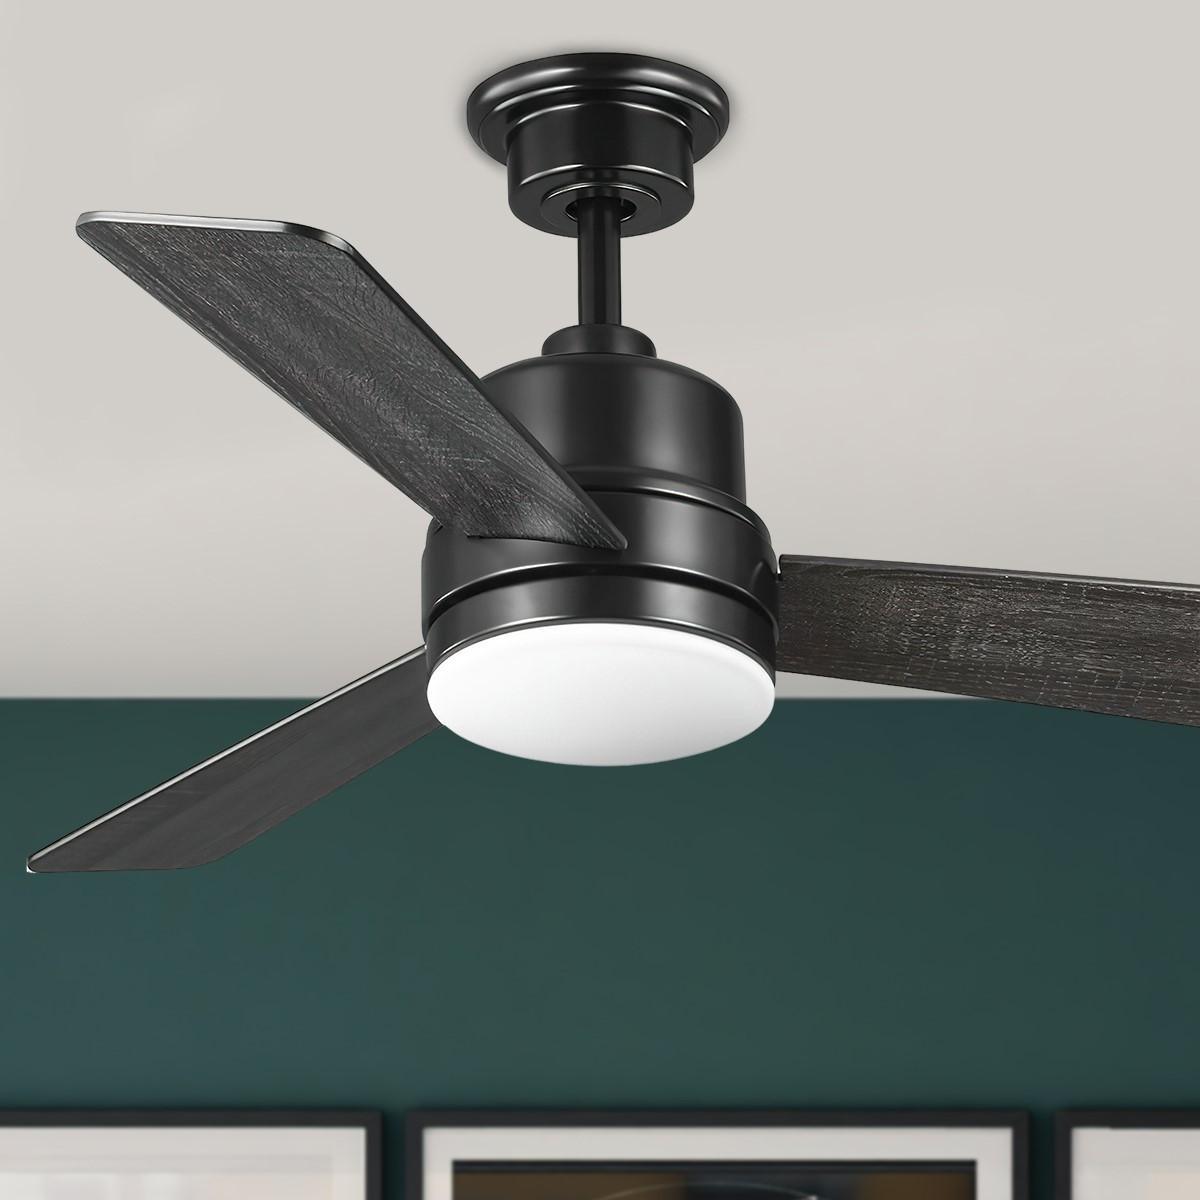 Trevina II 44 Inch Modern Ceiling Fan With Light, Wall Control Included